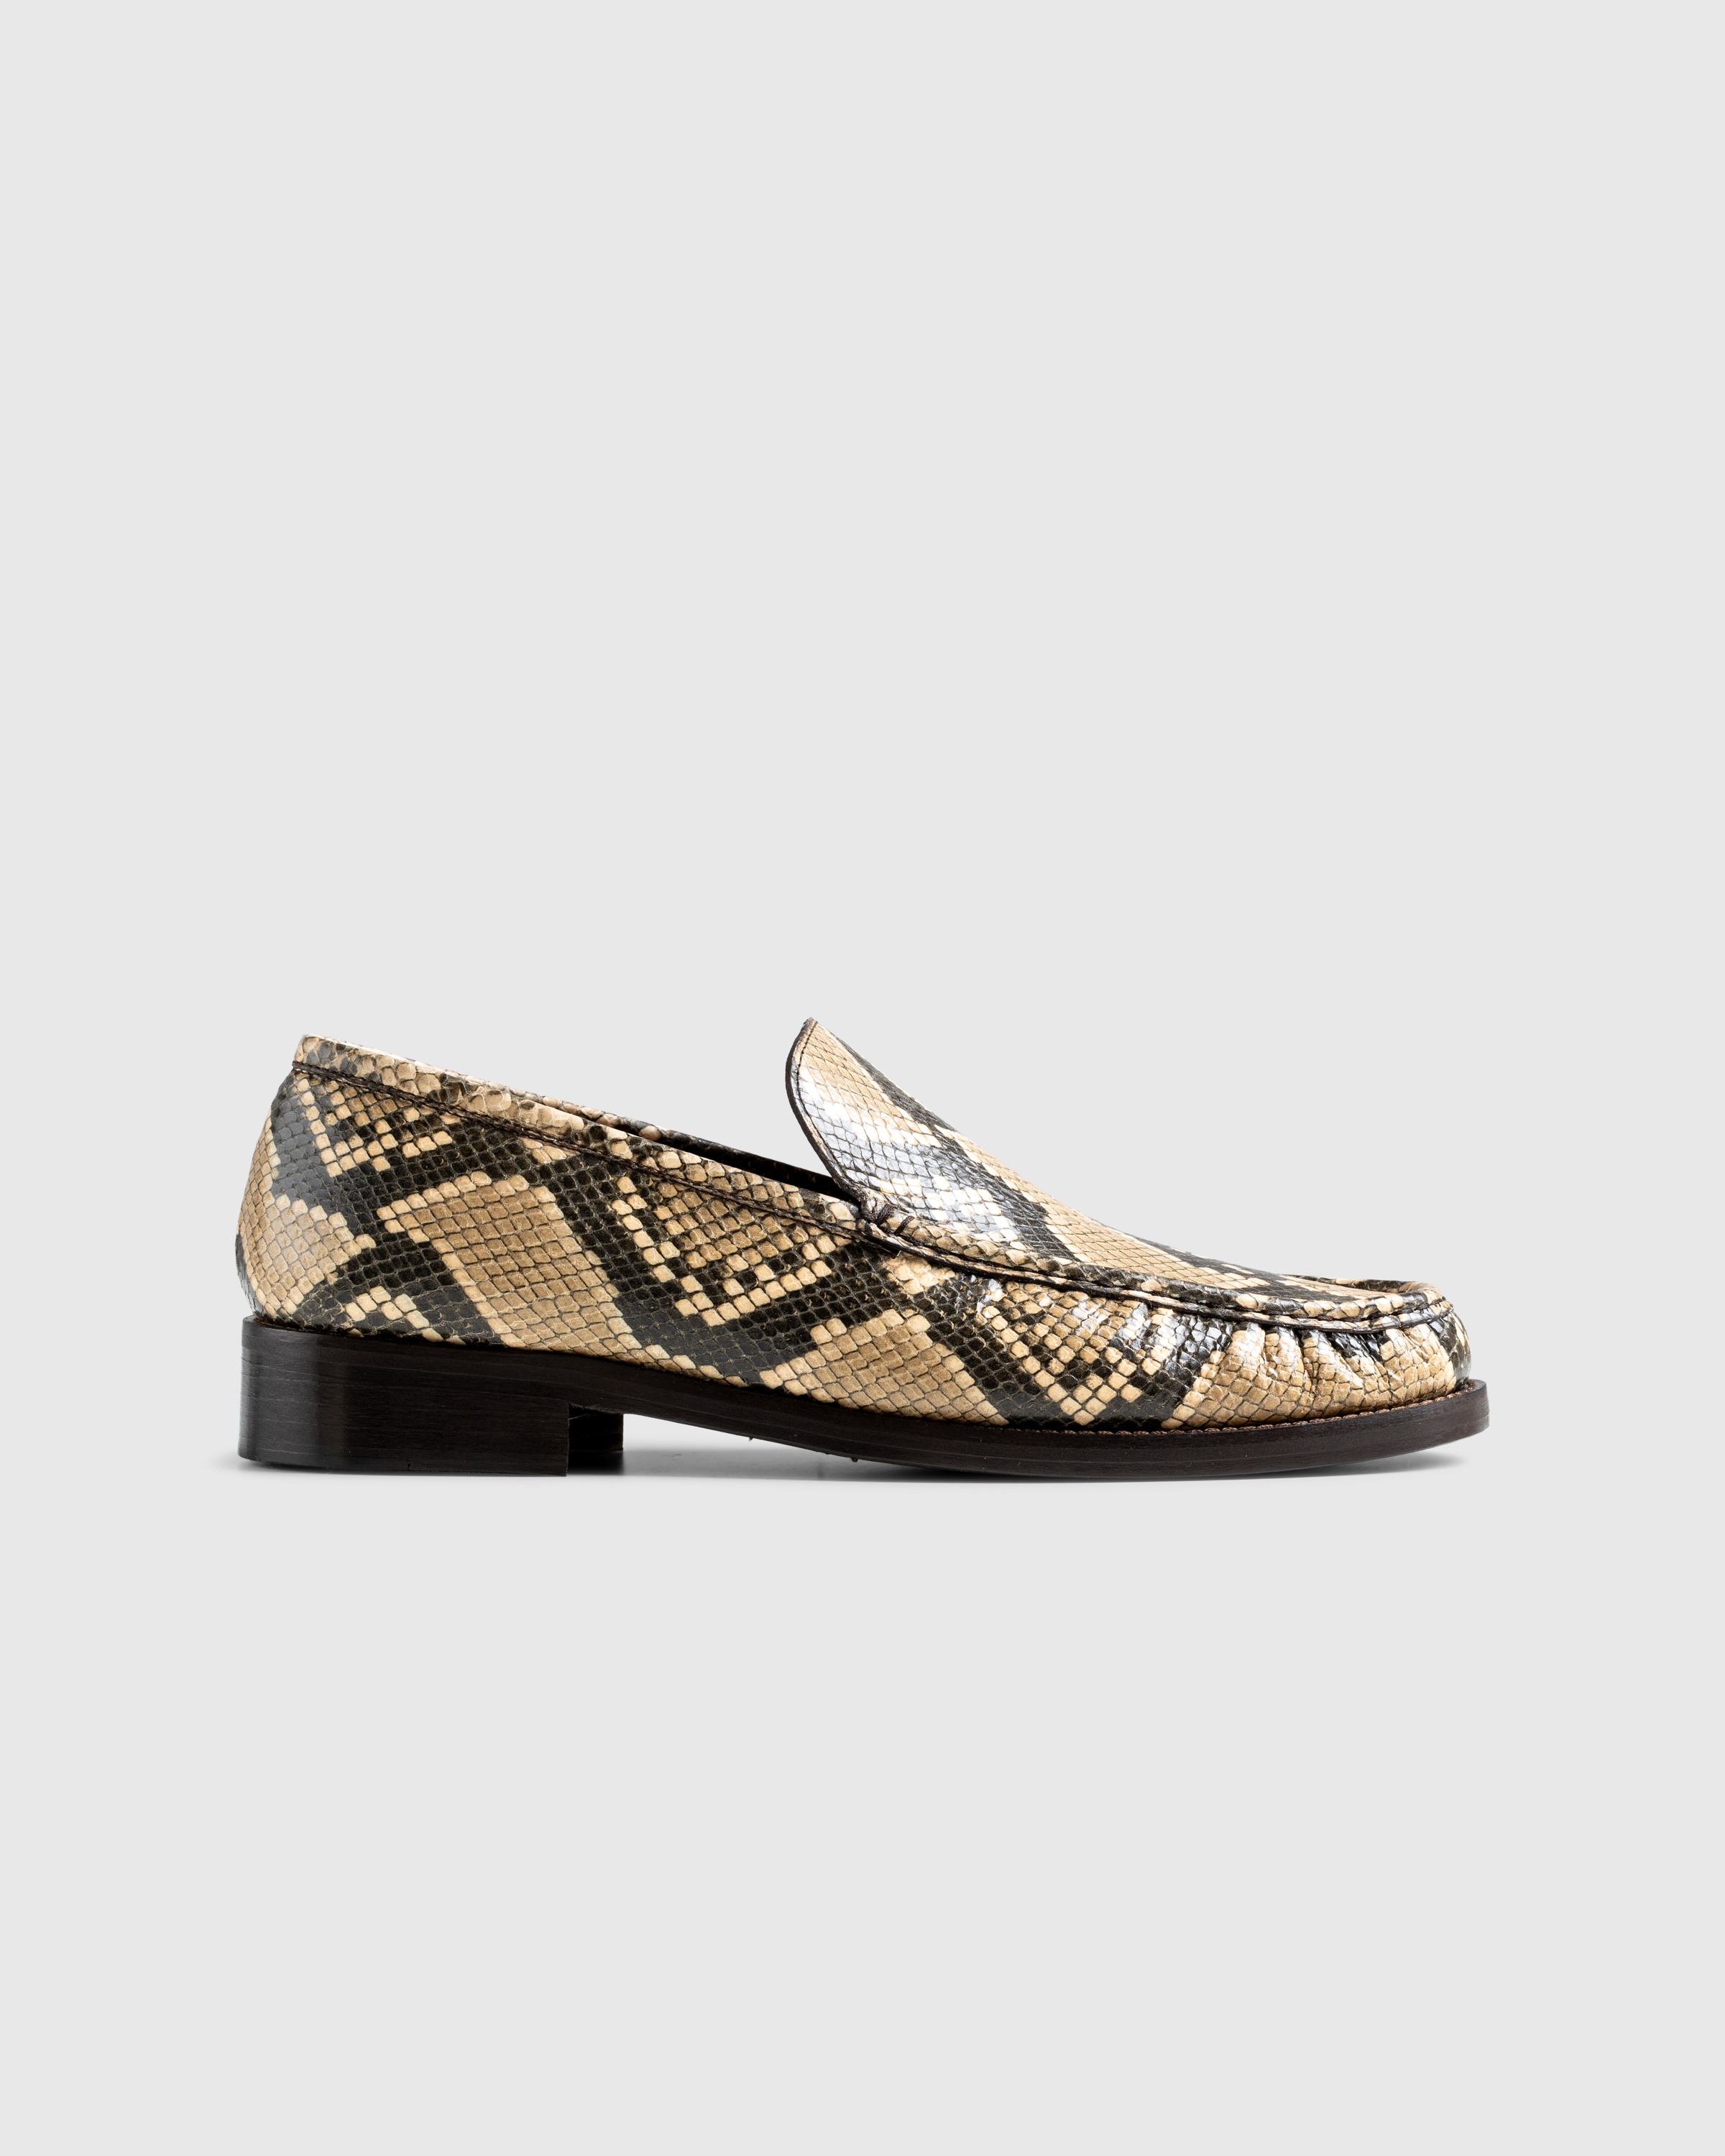 Acne Studios – Leather Loafers Beige - Sneakers - Beige - Image 1